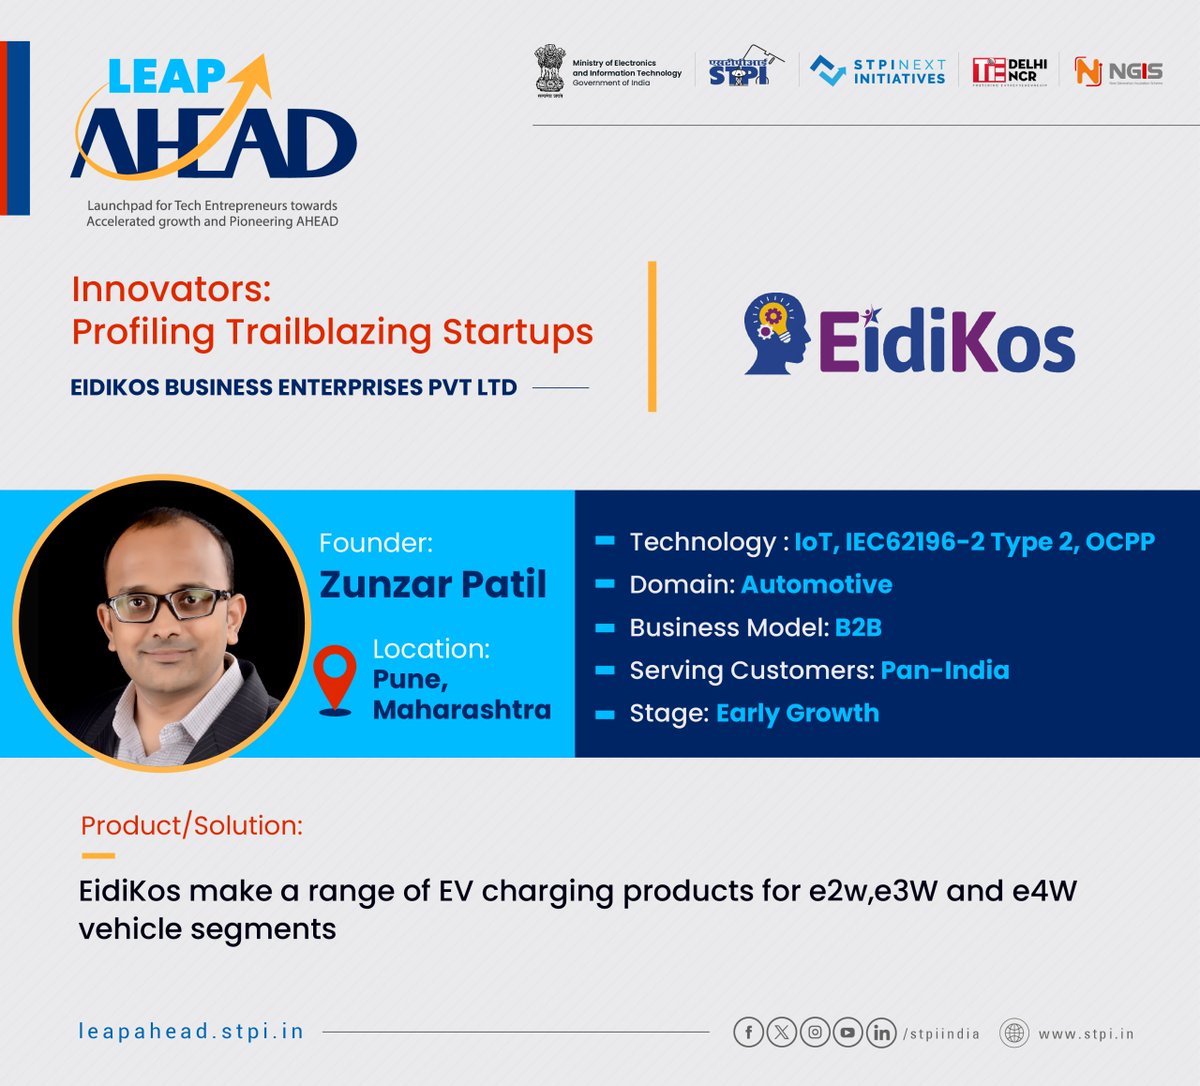 @Swapnow_ M/s @EidikosBusiness, one of the 75+ selected #startups for LEAP AHEAD Cohort, is creating a range of #EV charging products for e2w,e3W and e4W vehicle segments, thereby trying to bridge the gap in indigenization and self-sufficiency in EV charging Infrastructure in India.